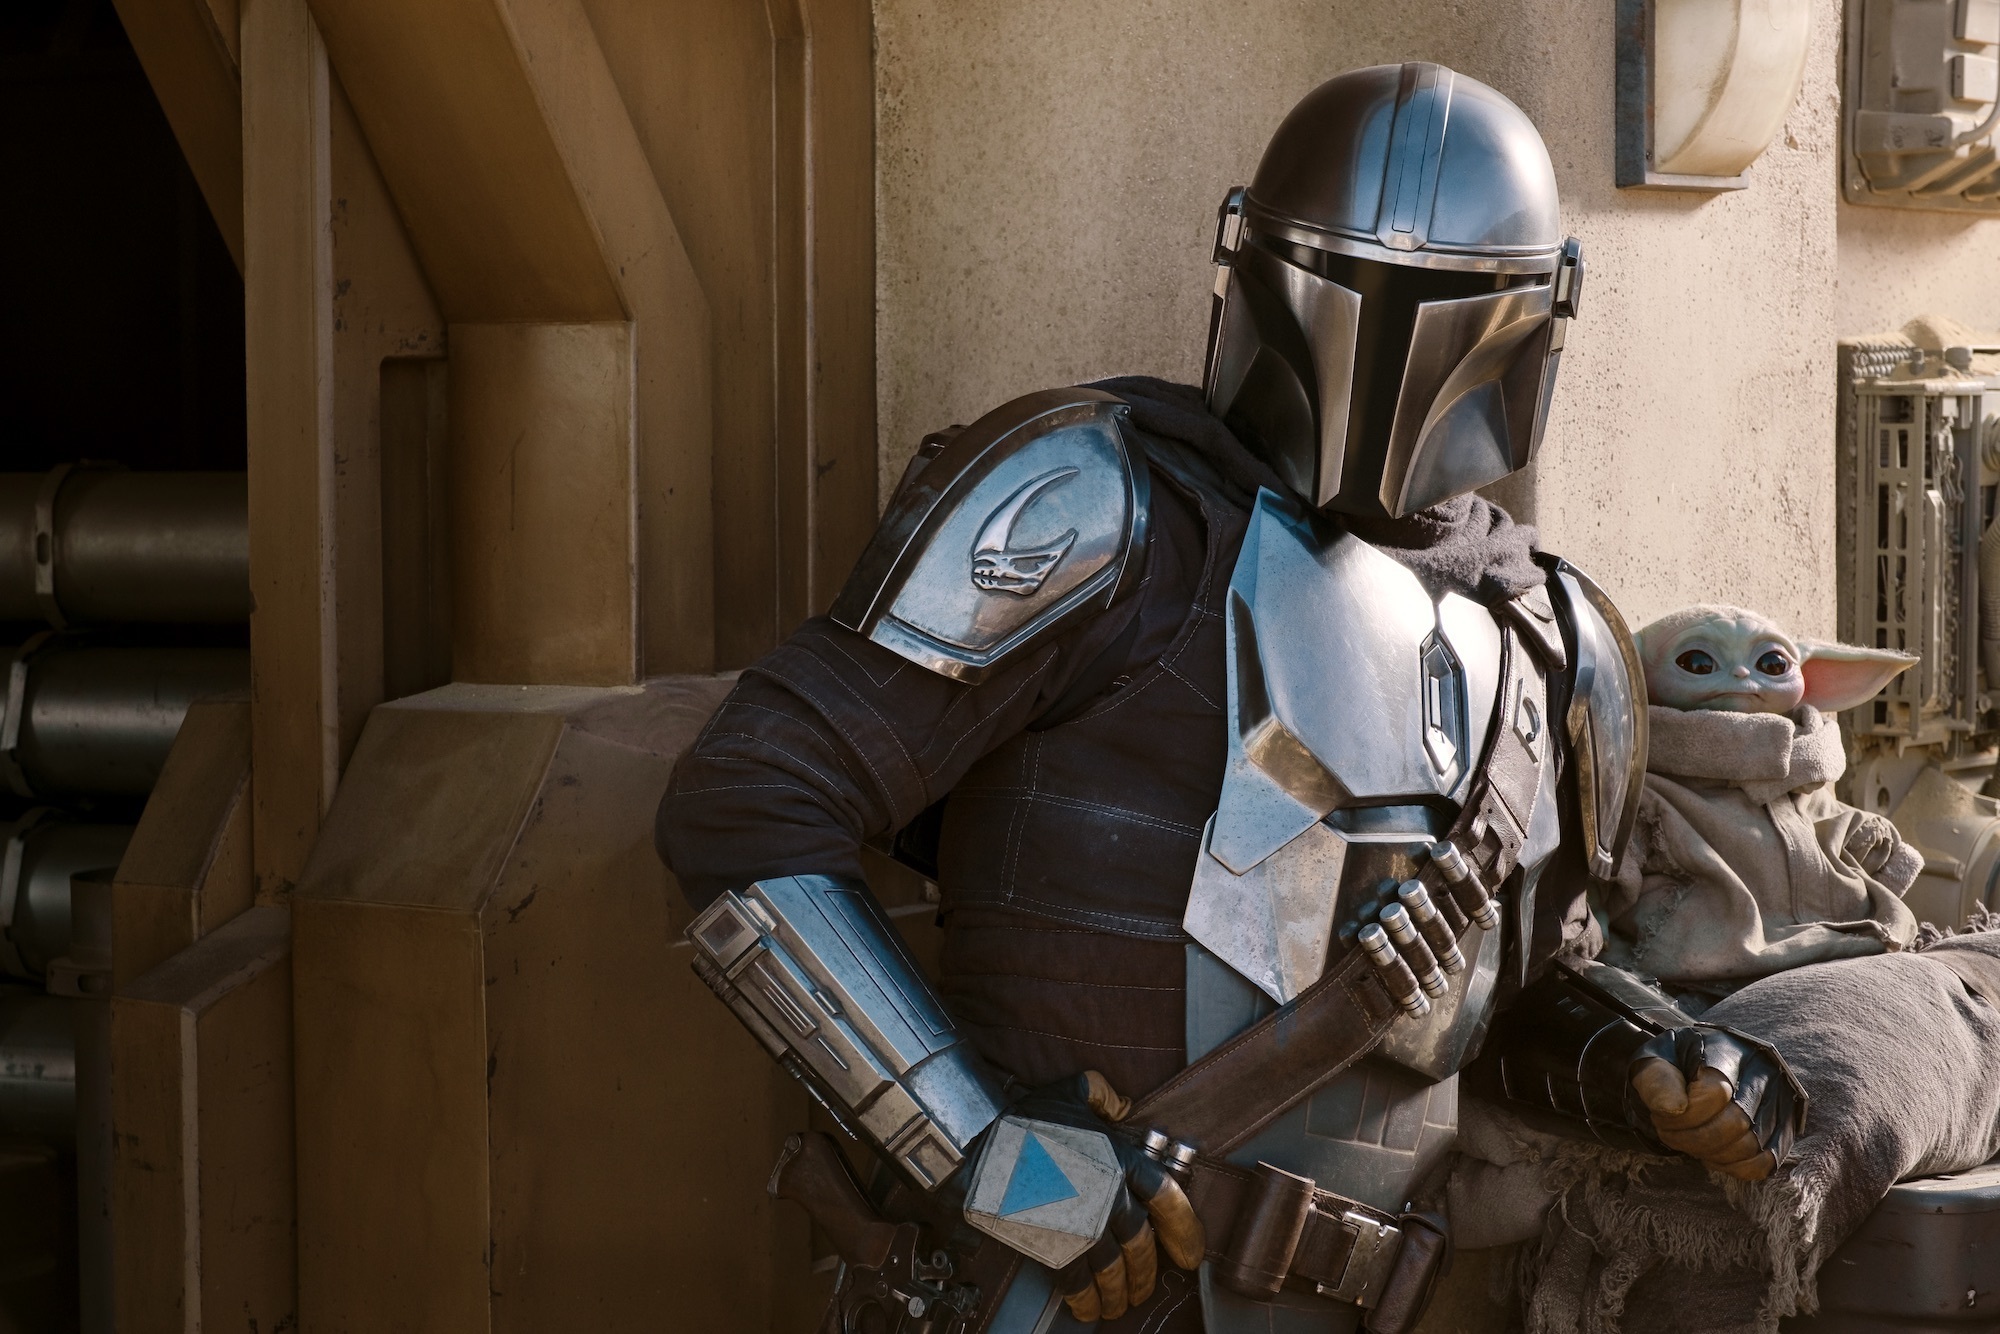 The Mandalorian leans against his speeder, where The Child is perched. They are in a desert town, The Mandalorian faces towards the camera while The Child looks offscreen to the right.